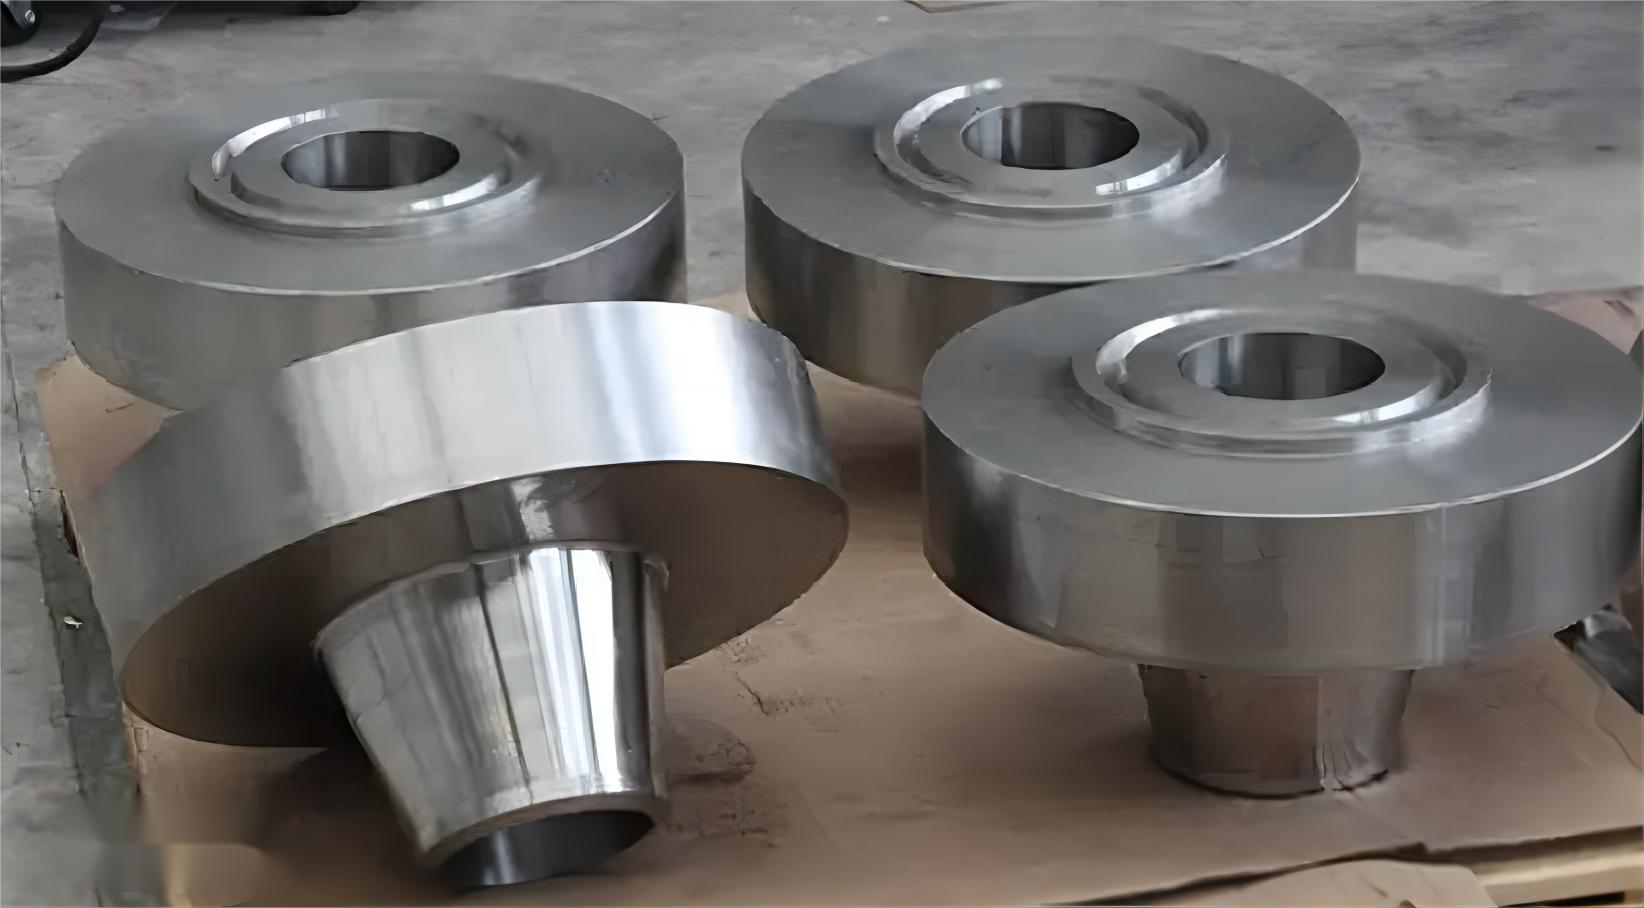 How to choose flanges for carbon steel and stainless steel?